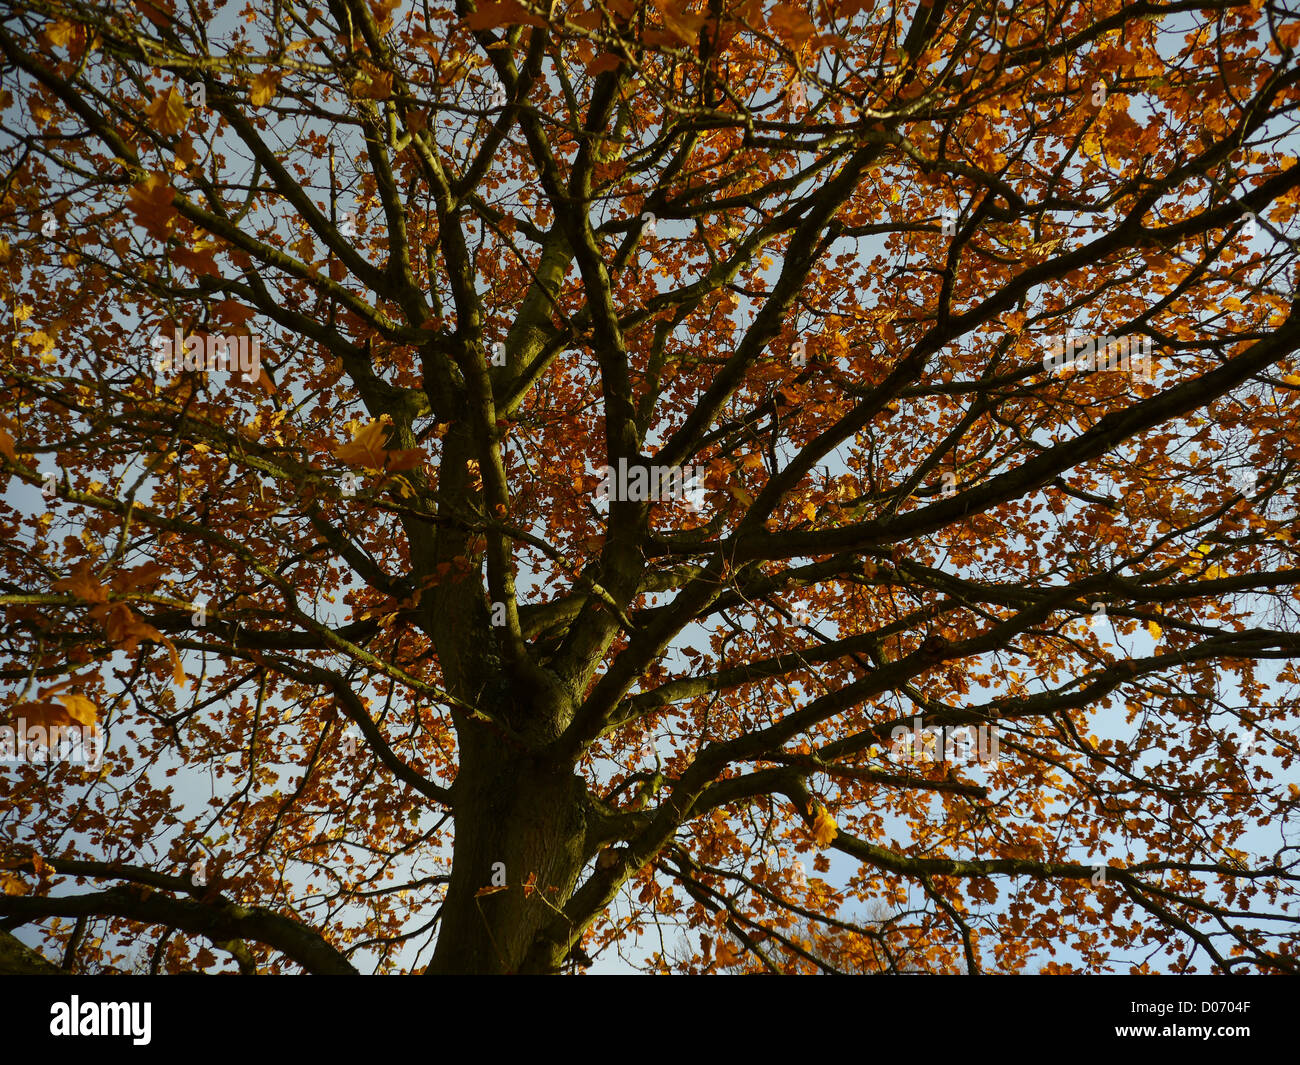 Autumnal tree crown, Chatsworth House, Bakewell, Derbyshire, England, UK. Colour Stock Photo